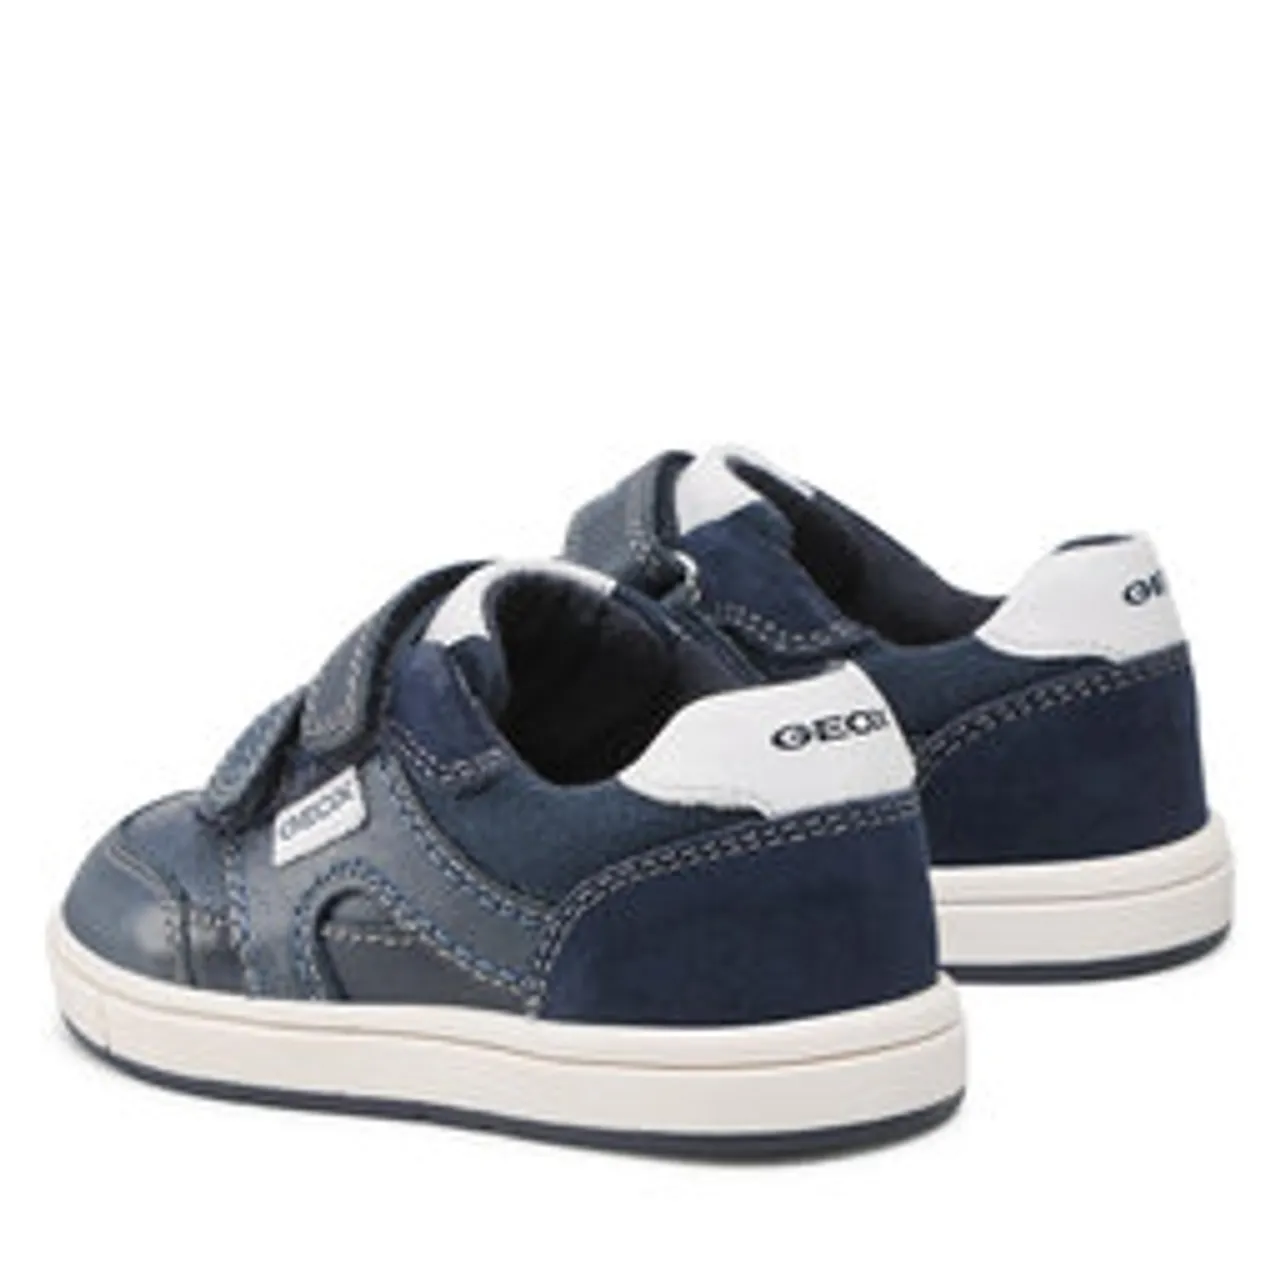 Sneakers Geox B Trottola B. A B2543A 0CL22 C4211 M Navy/White